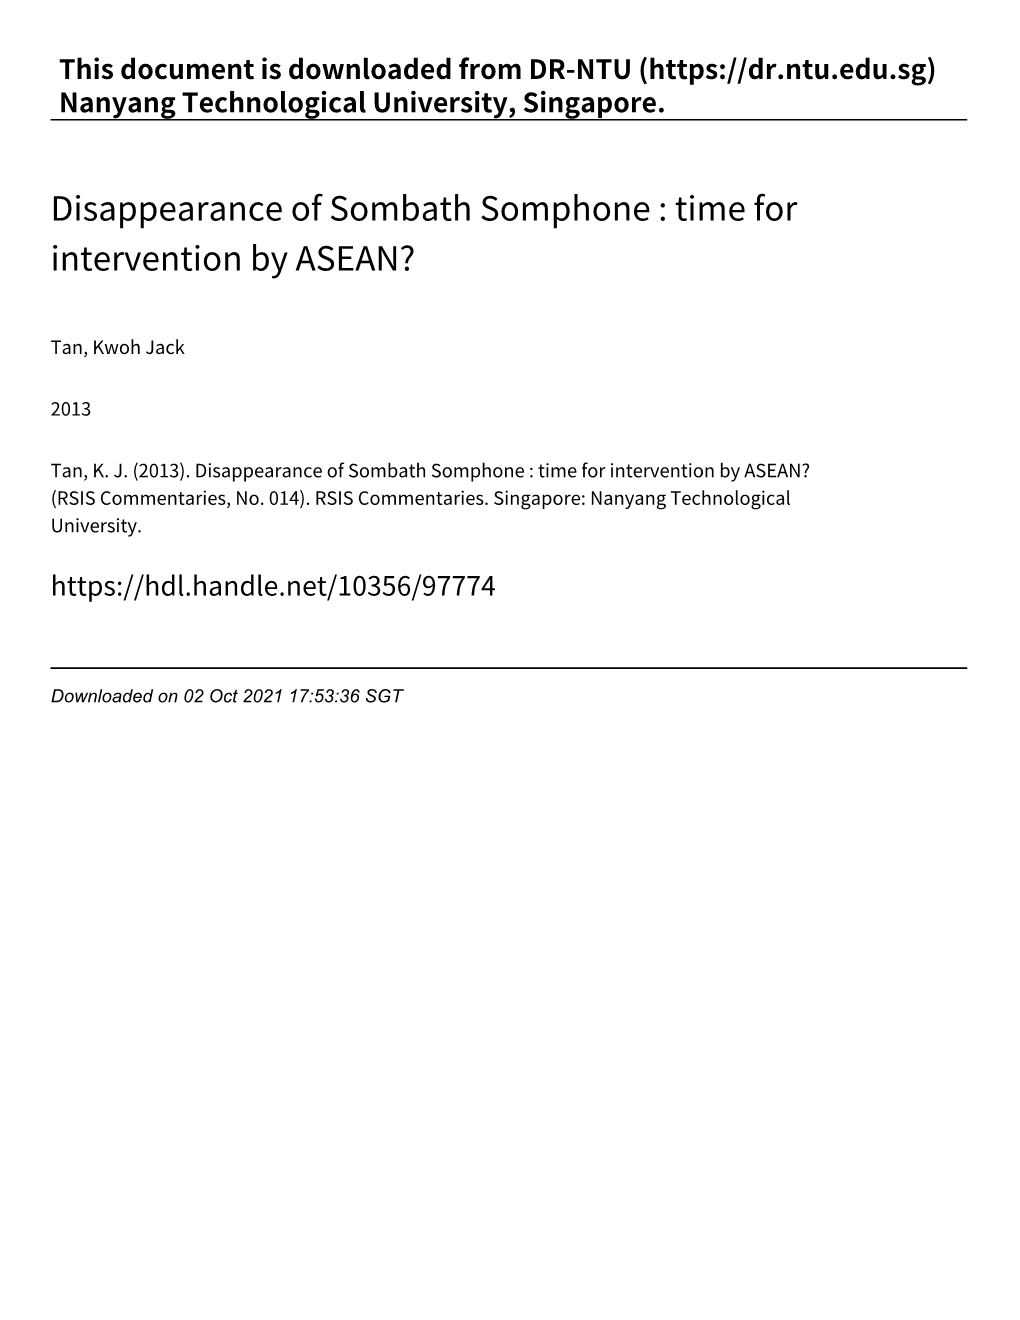 Disappearance of Sombath Somphone : Time for Intervention by ASEAN?